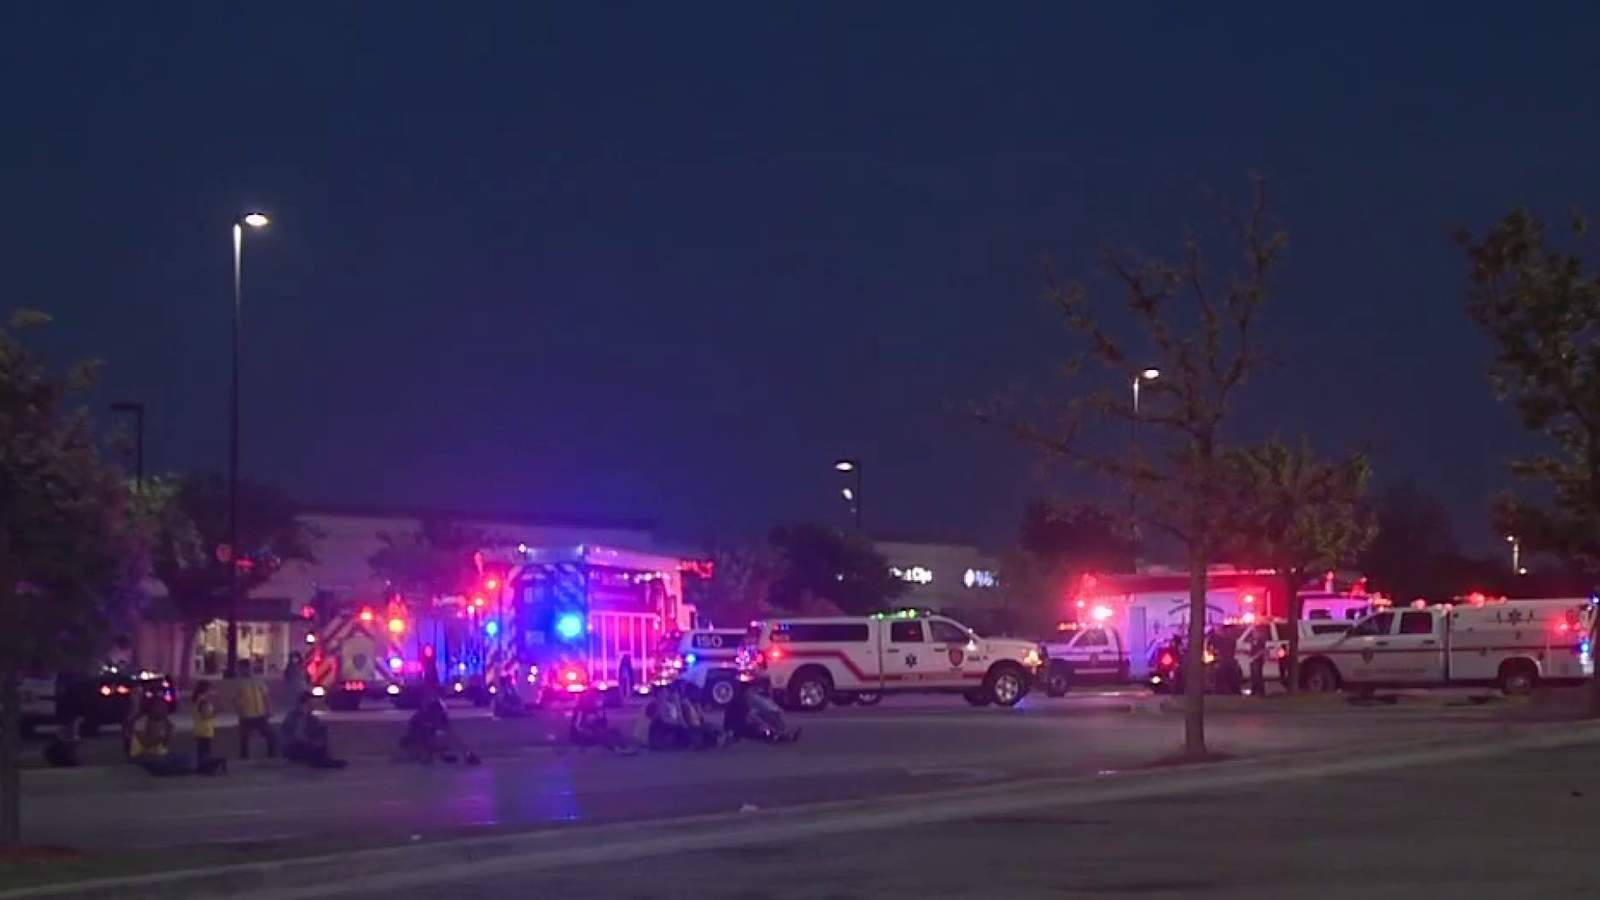 ‘All clear’ given at two separate Walmart stores following bomb threats, police say